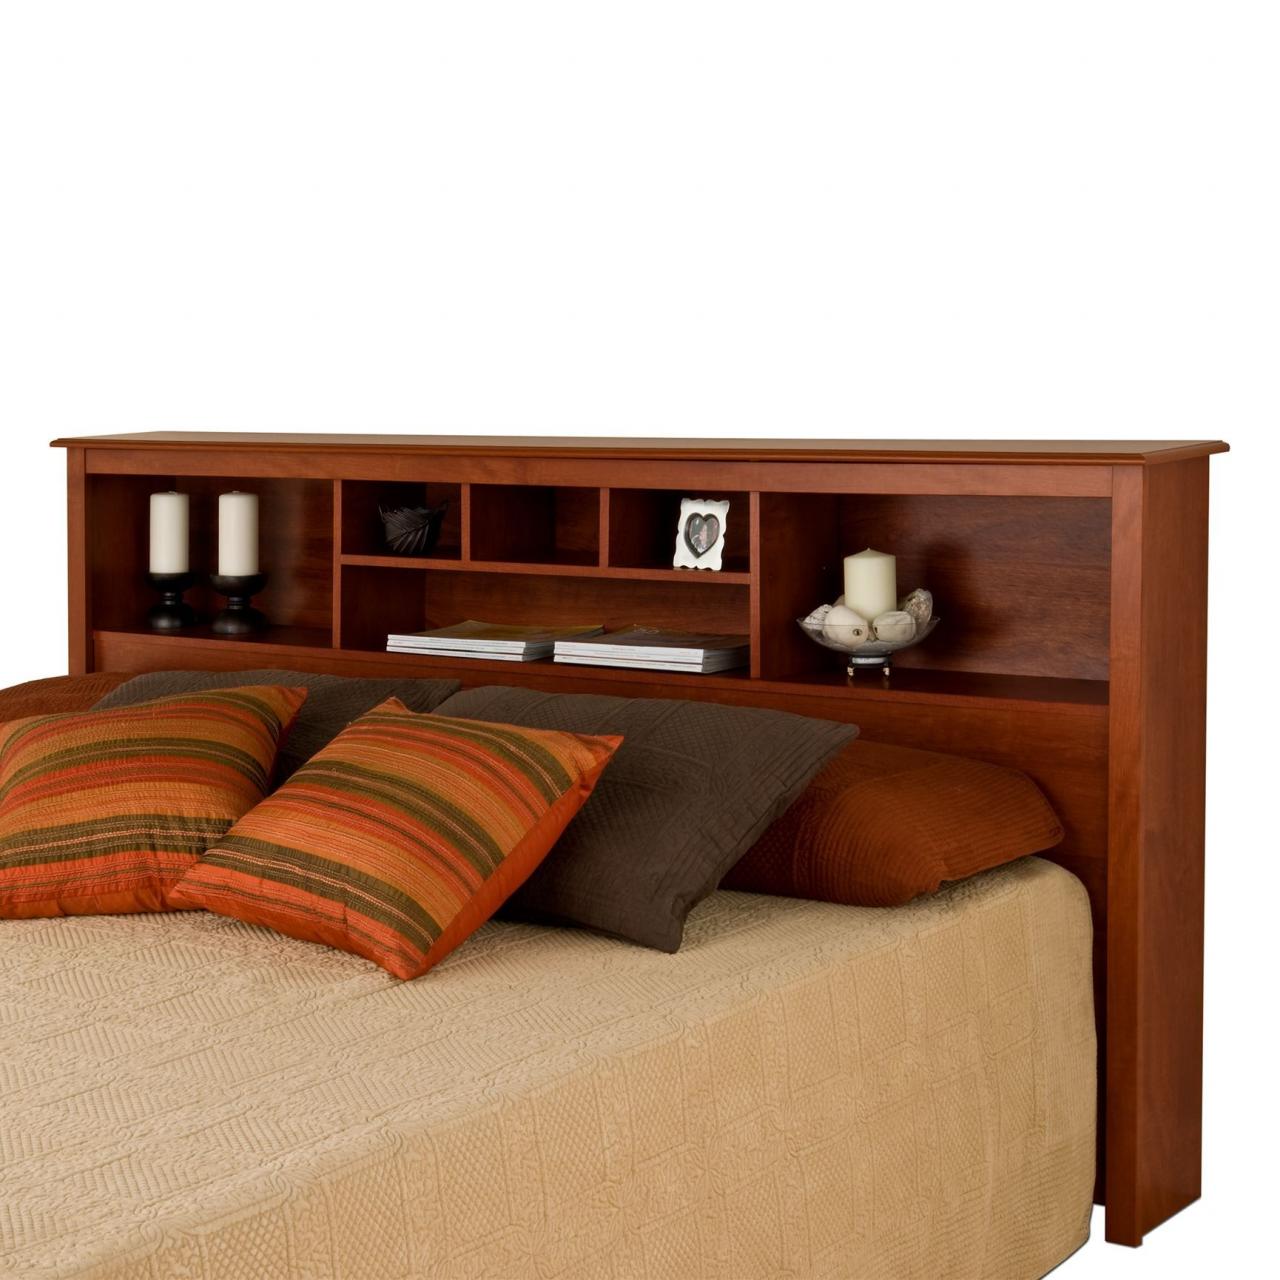 This 11” deep bookcasestyle storage headboard has 6 compartments